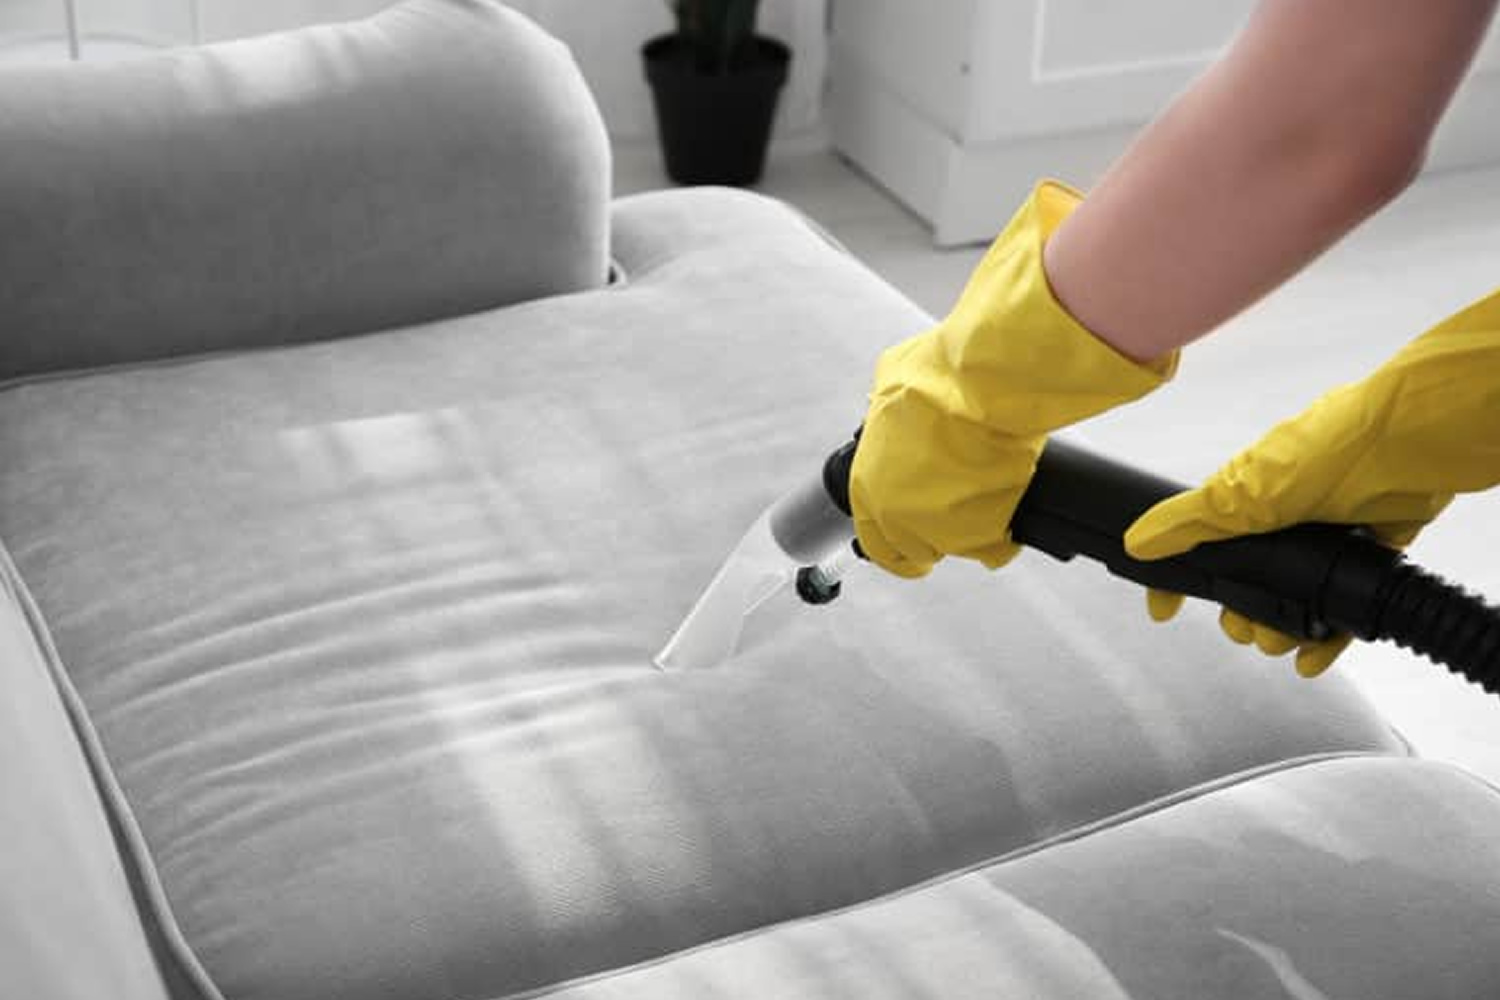 carolina-clean-pro-carpet-cleaning-upholstery-tile-grout-cleaning-hard-floor-hardwood-floor-cleaning-service-for-Garner-Raleigh-Cary-Clayton-Smithfield-Johnston-County-Wake-County-NC-41